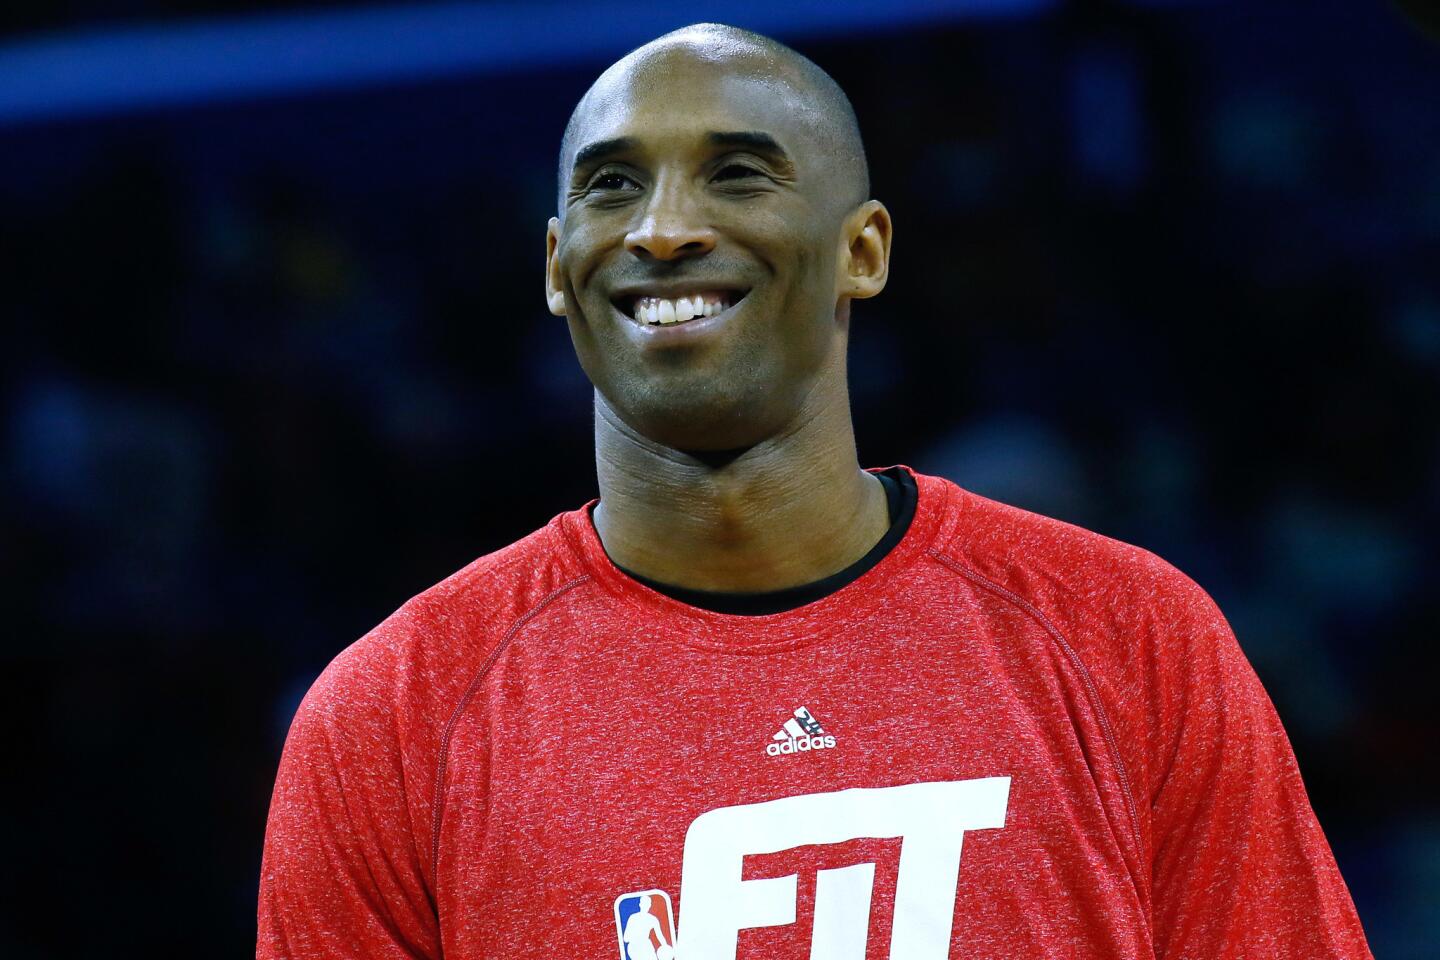 Los Angeles Lakers guard Kobe Bryant warms up before an NBA basketball game, Wednesday, Jan. 21, 2015, in New Orleans.